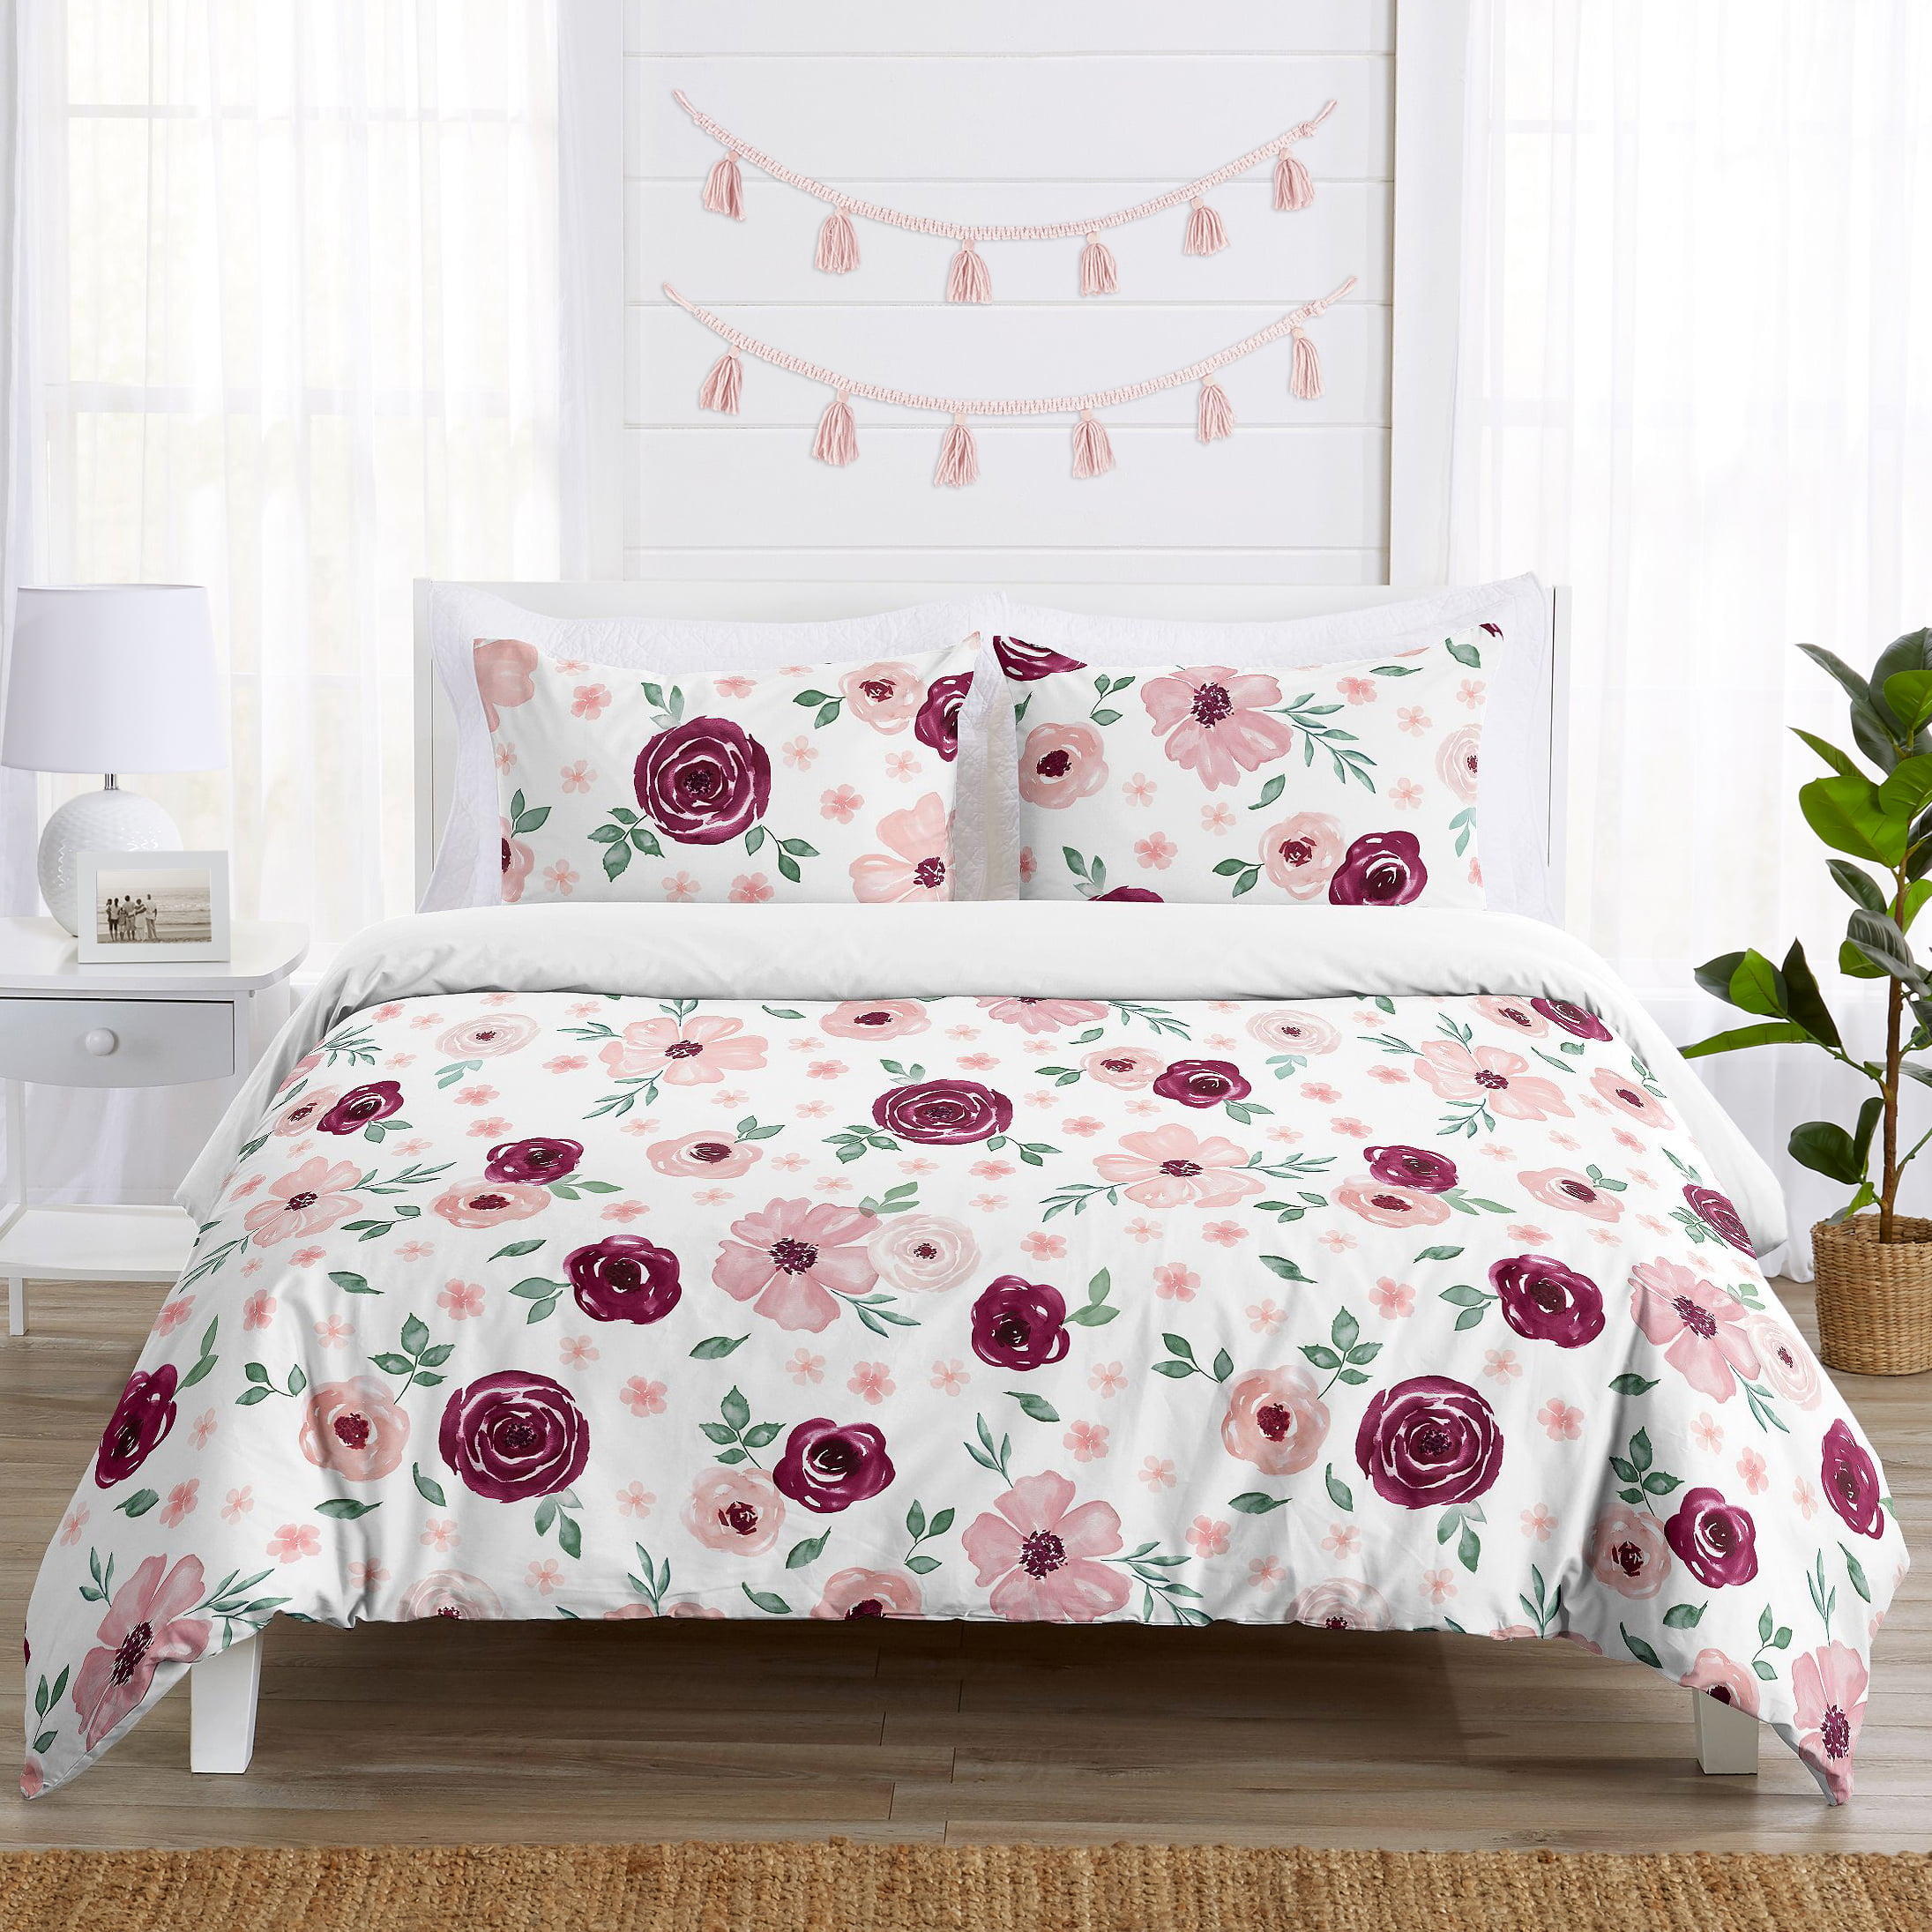 Details about  / Lemon Yellow Floral Blossom Girl Full Queen Bedding Comforter Set by Sweet Jojo